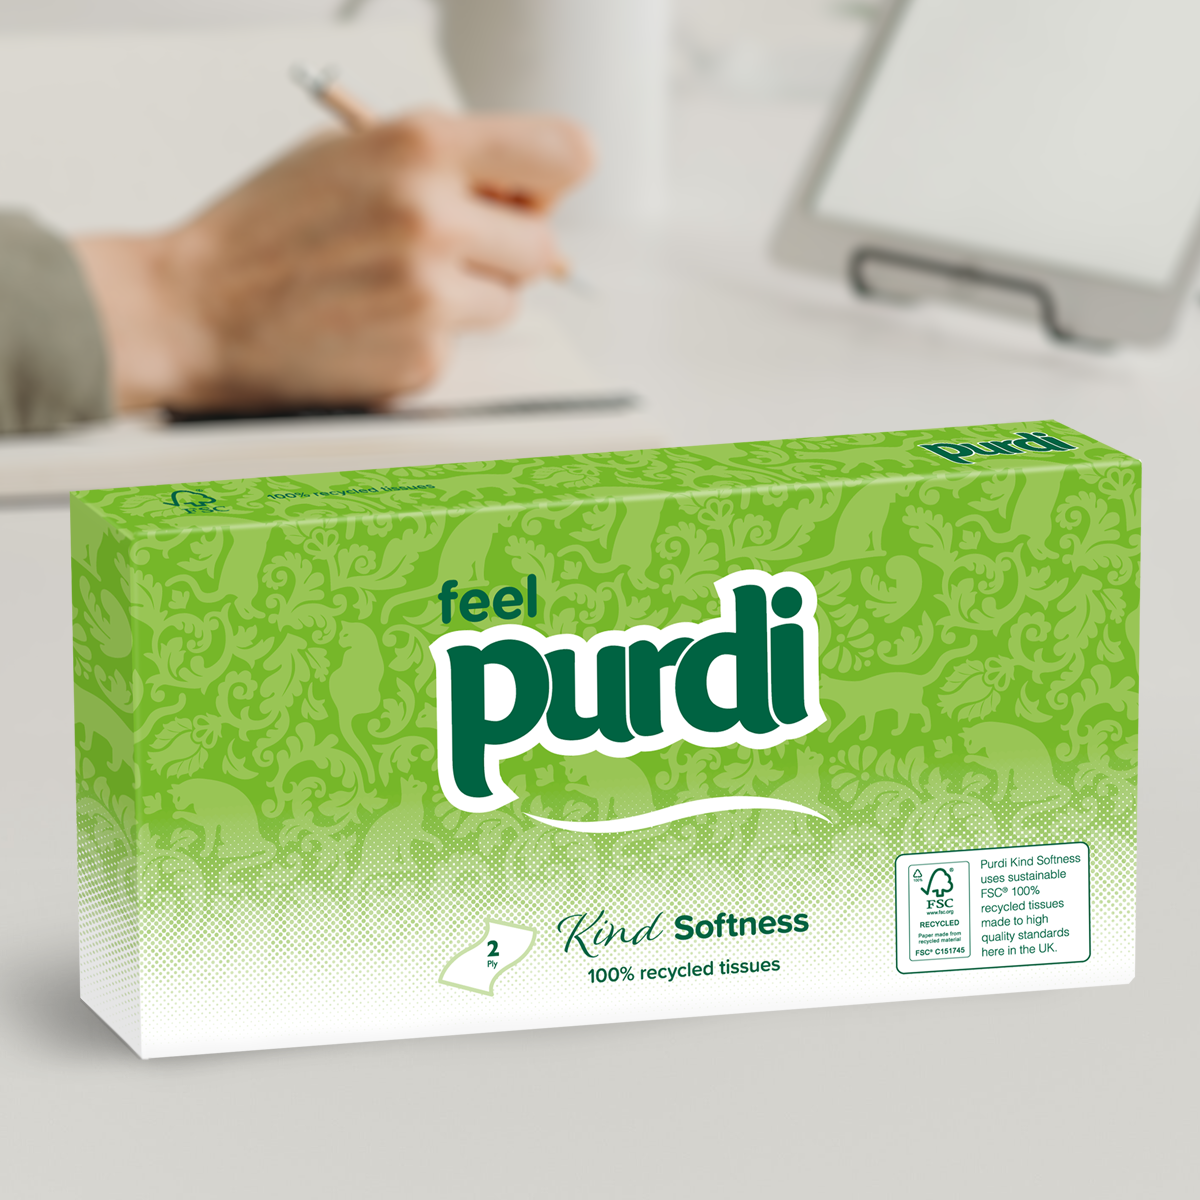 Kind Softness facial tissue package sitting on desk